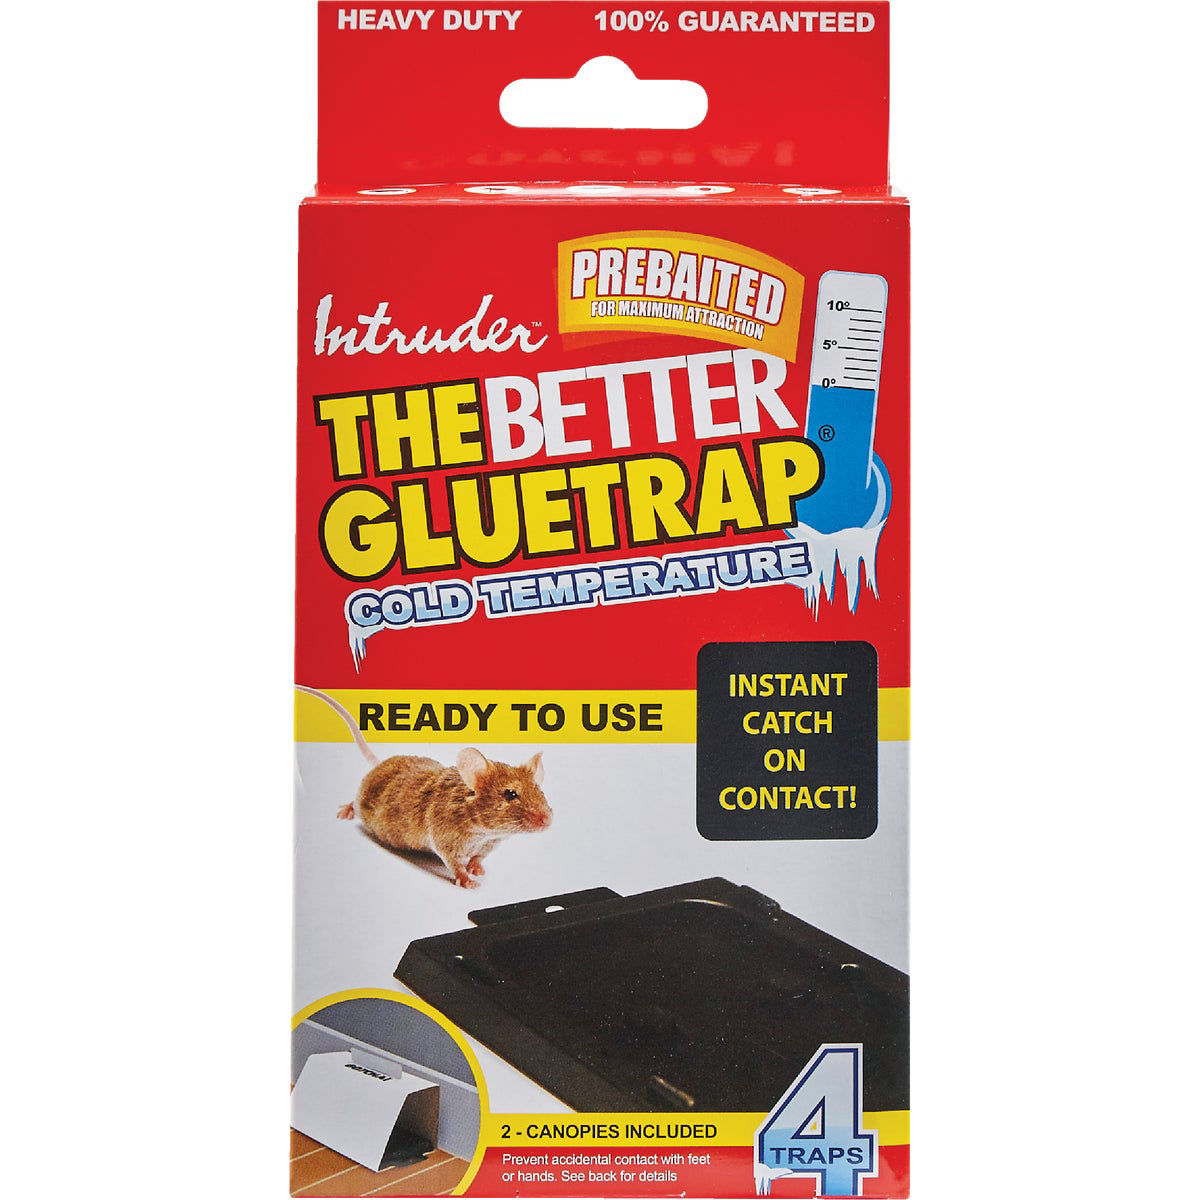 Intruder's The Better Mousetrap 6 Pack 